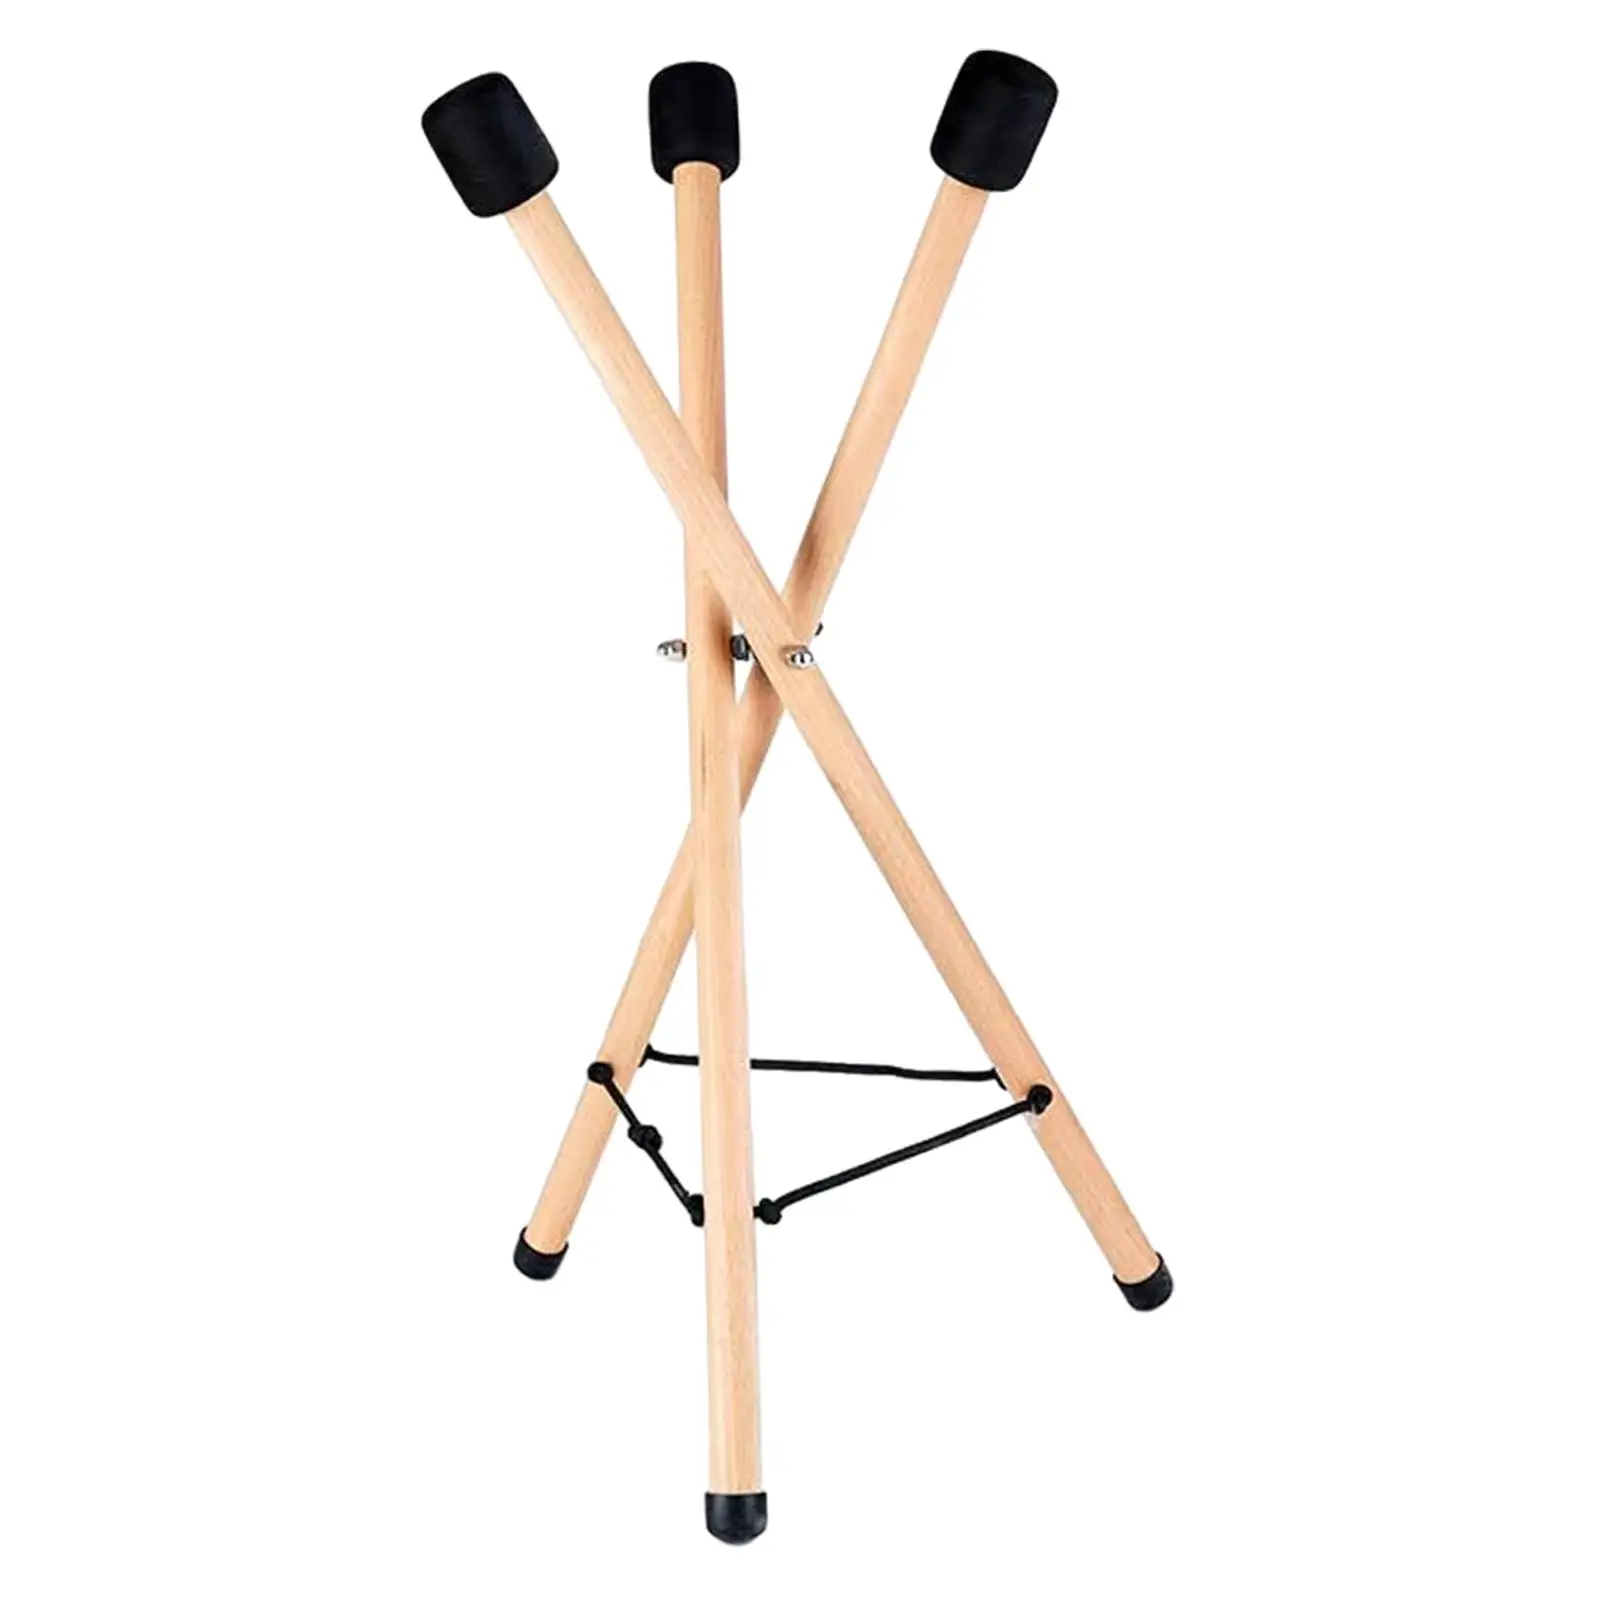 Snare Drum Stand Top Rubber Pad Adjustable Solid Wood Extendable 93cm Height for Yoga Stage Performances Camping Parties Picnics